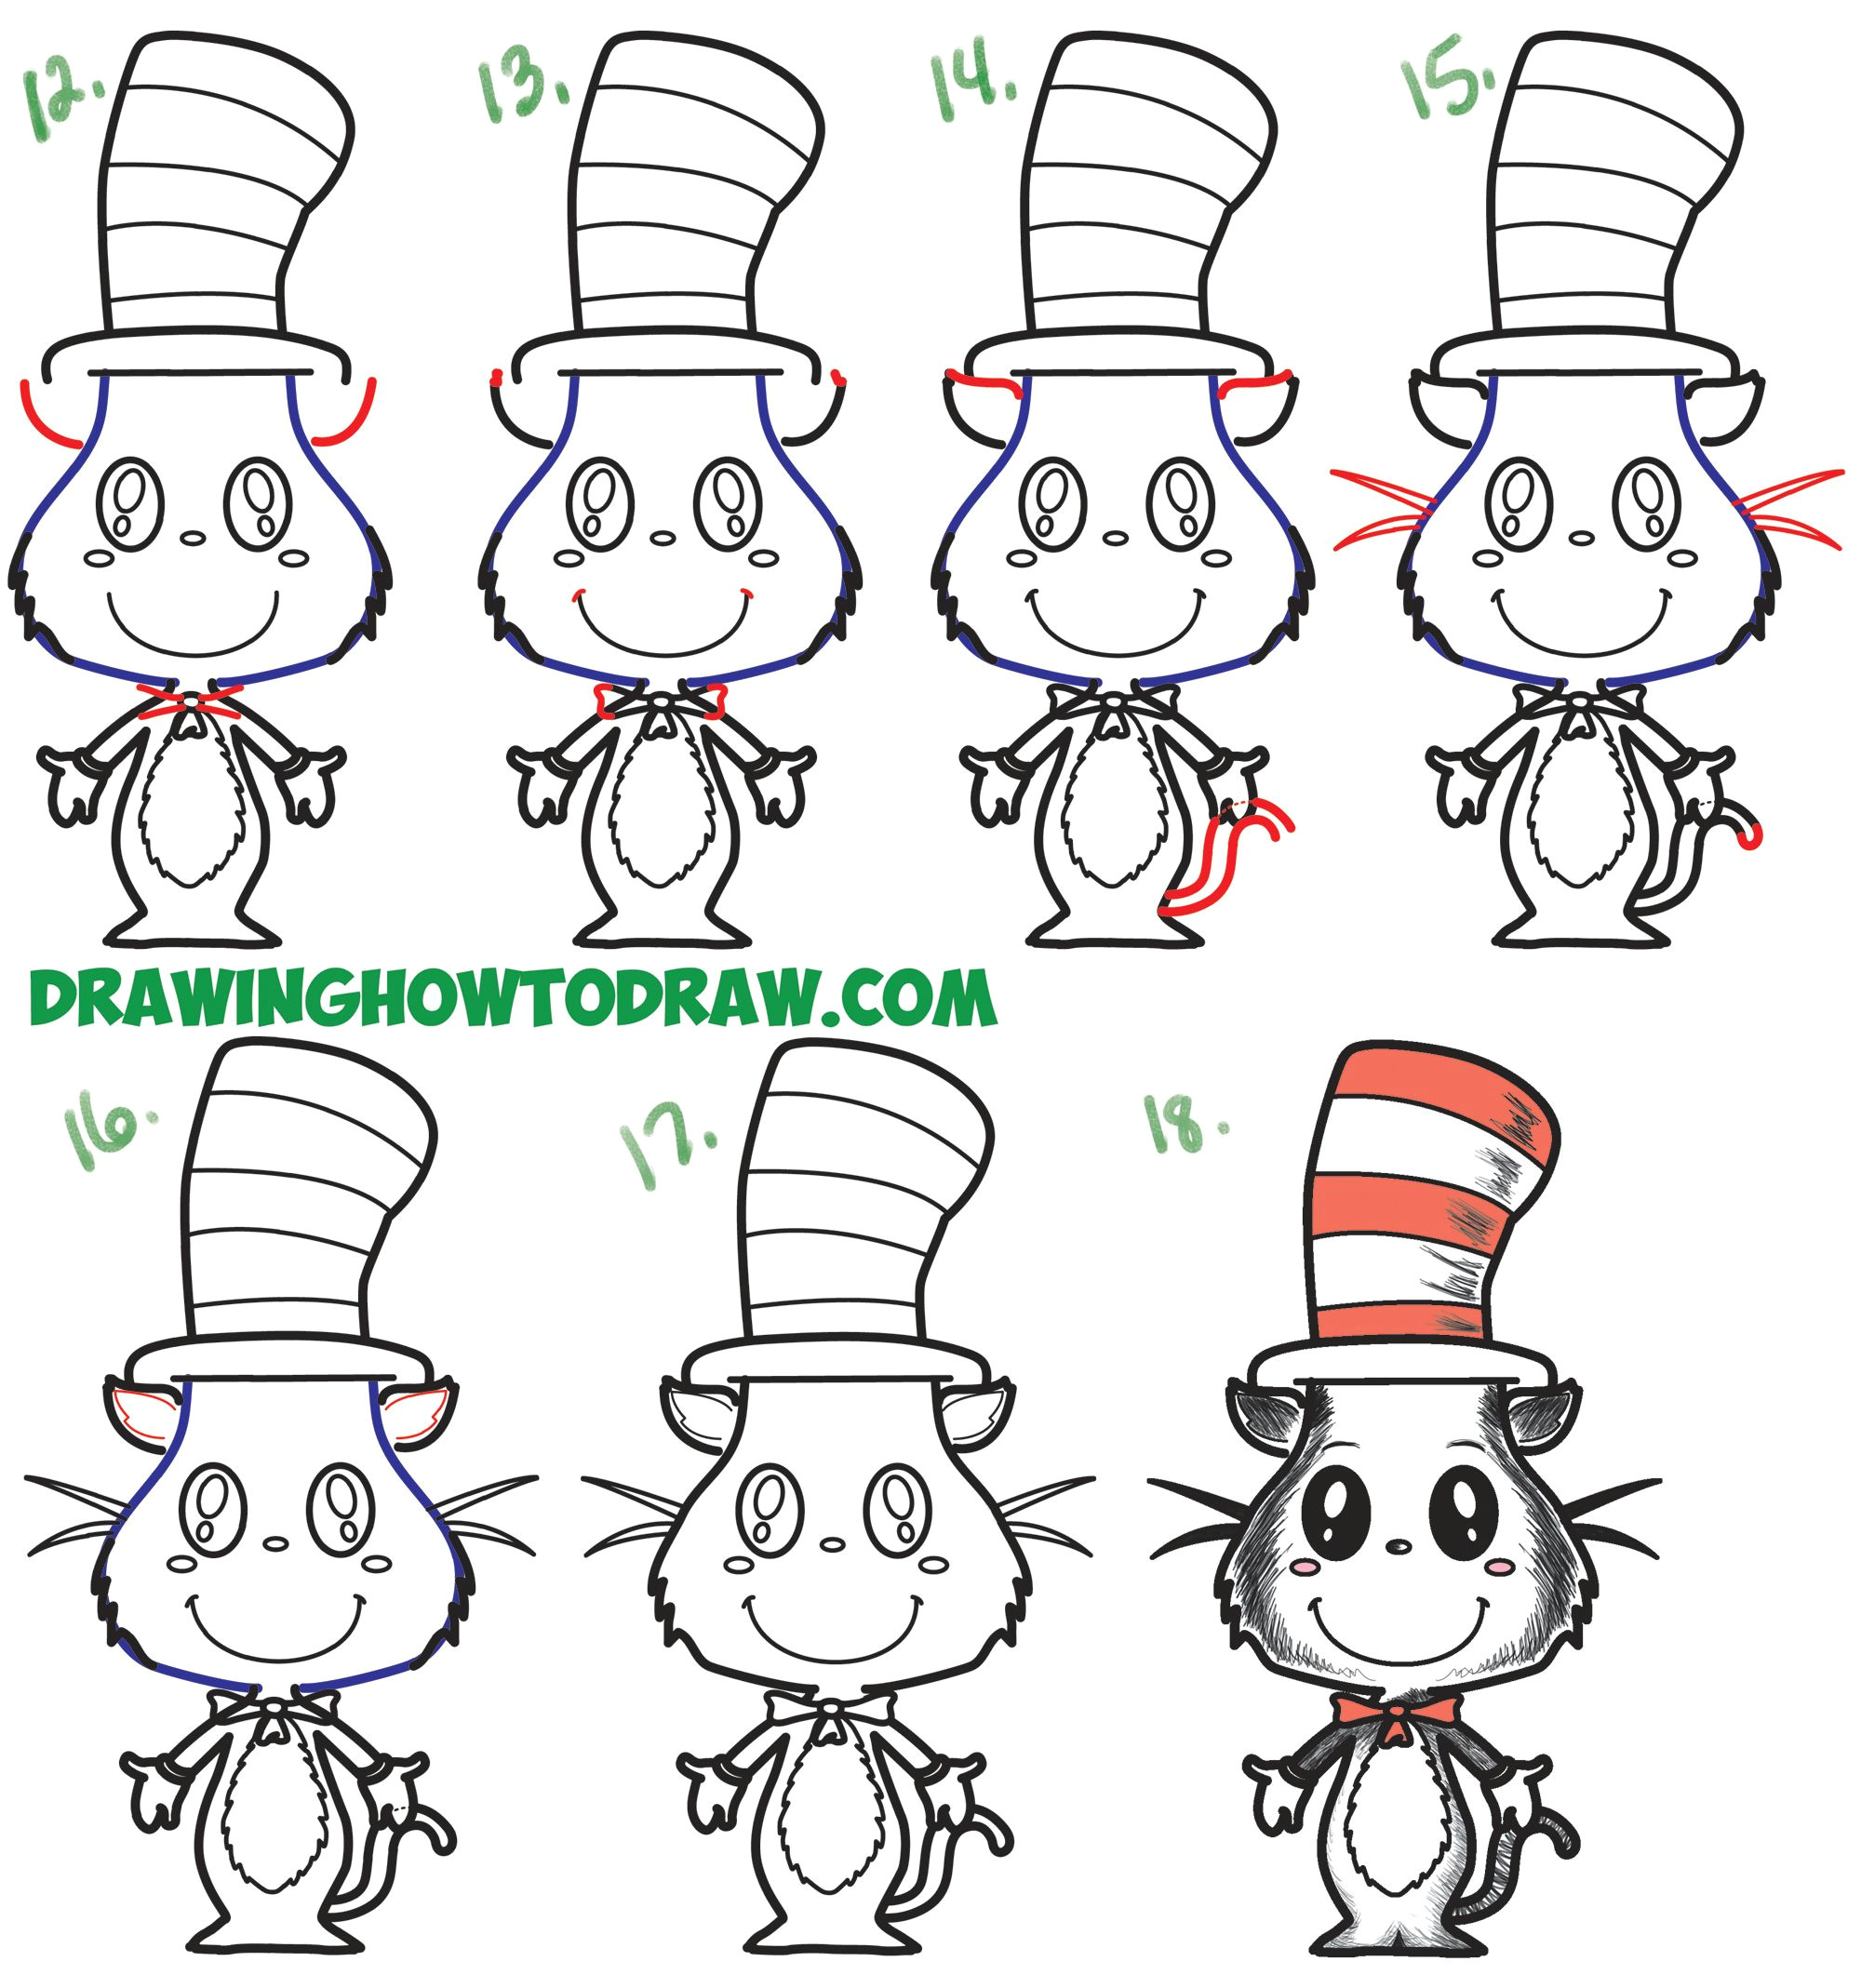 Easy Basic Drawing How to Draw the Cat In the Hat Cute Kawaii Chibi Version